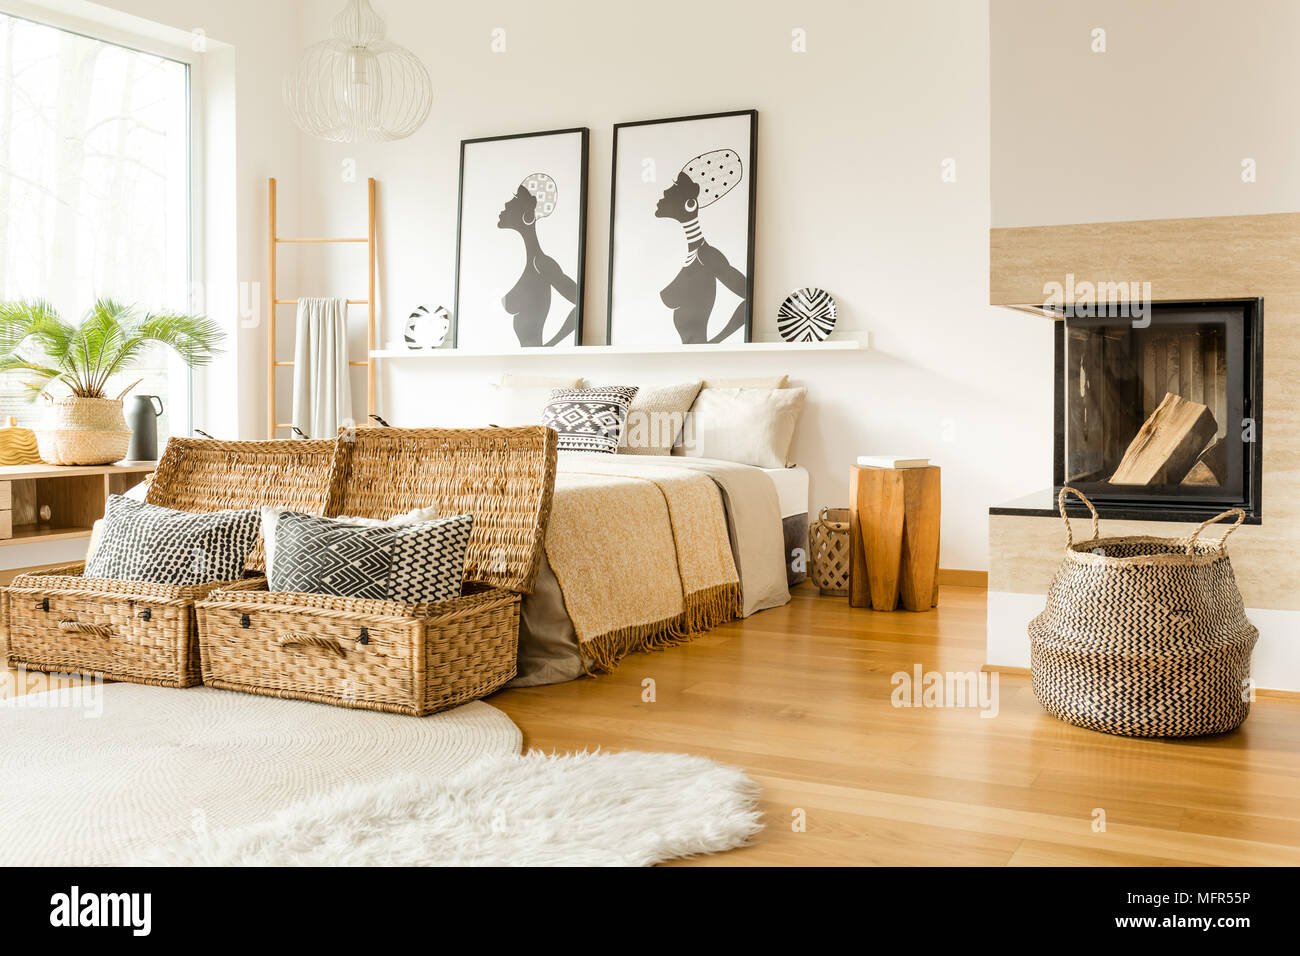 Fireplace, wattle boxes with pillows, bed and African posters in a boho bedroom interior Stock Photo